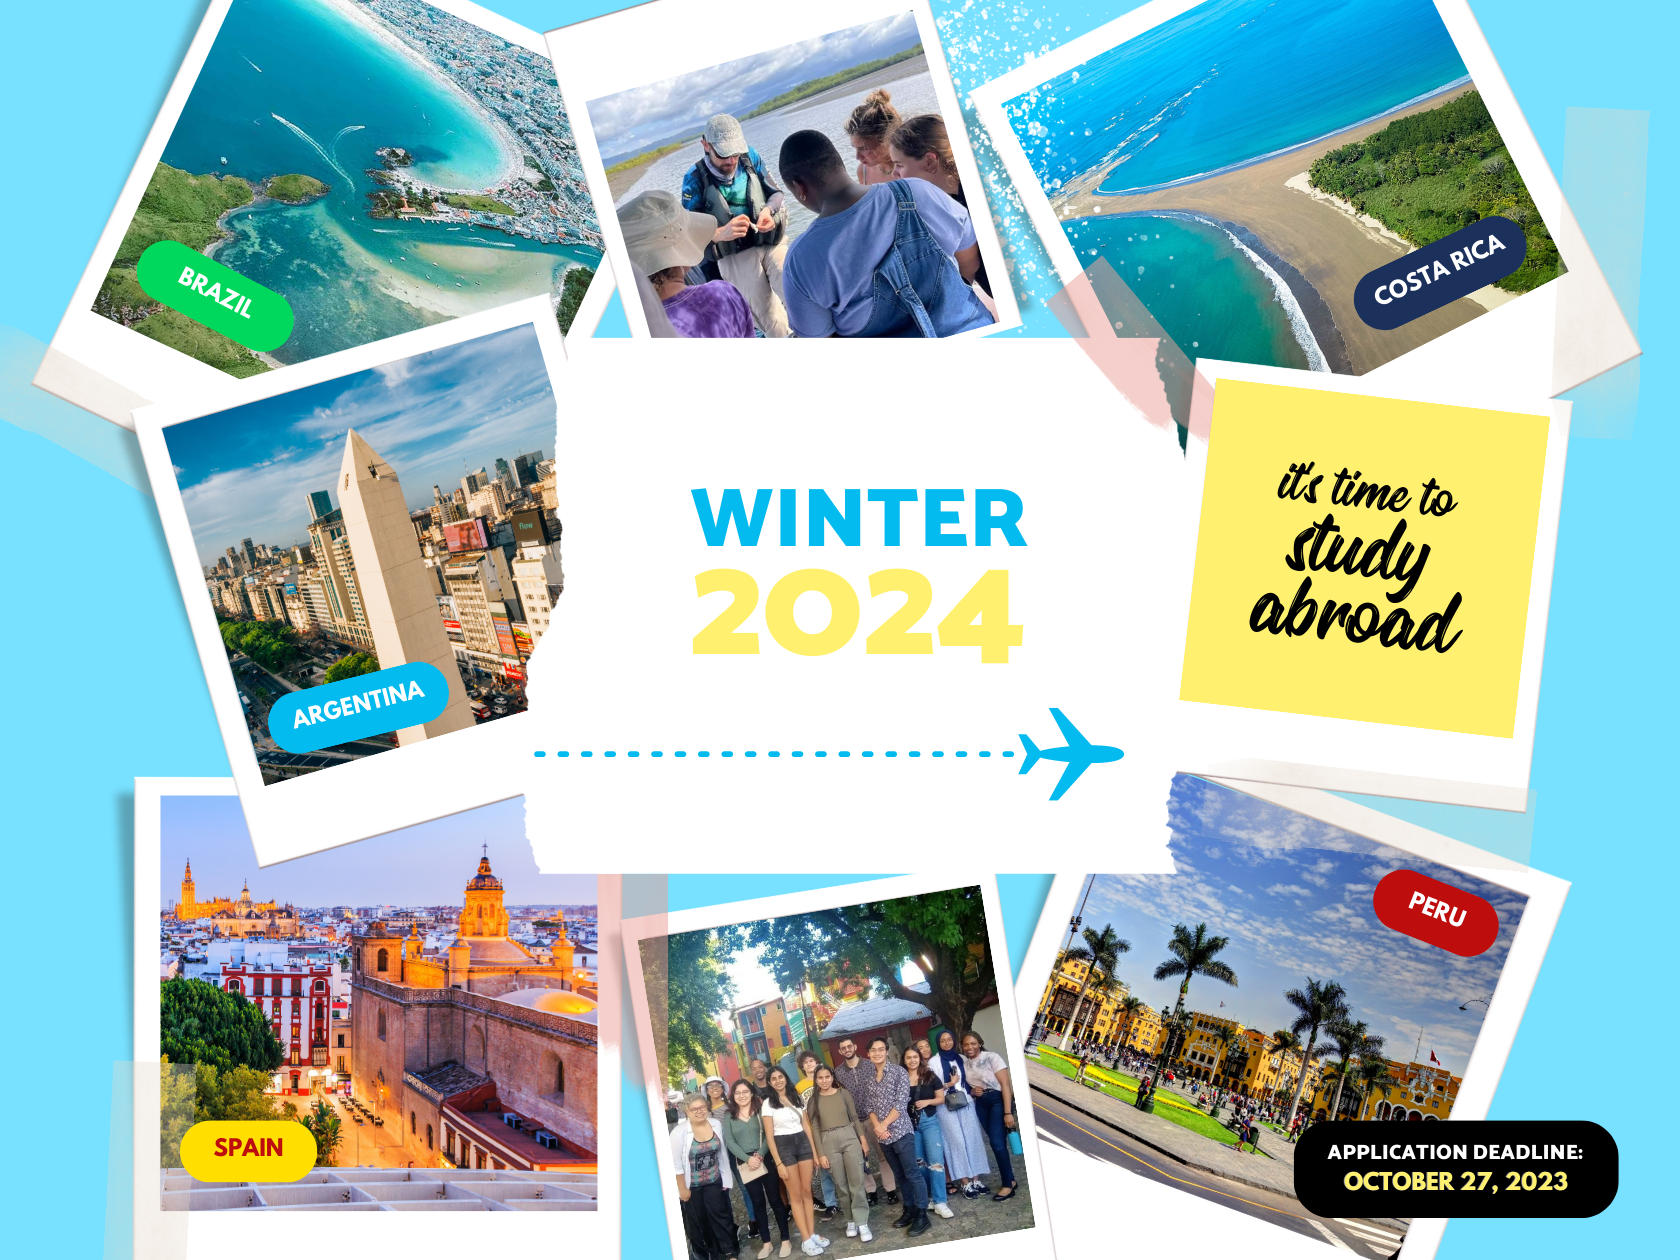 Study abroad this winter 2024 